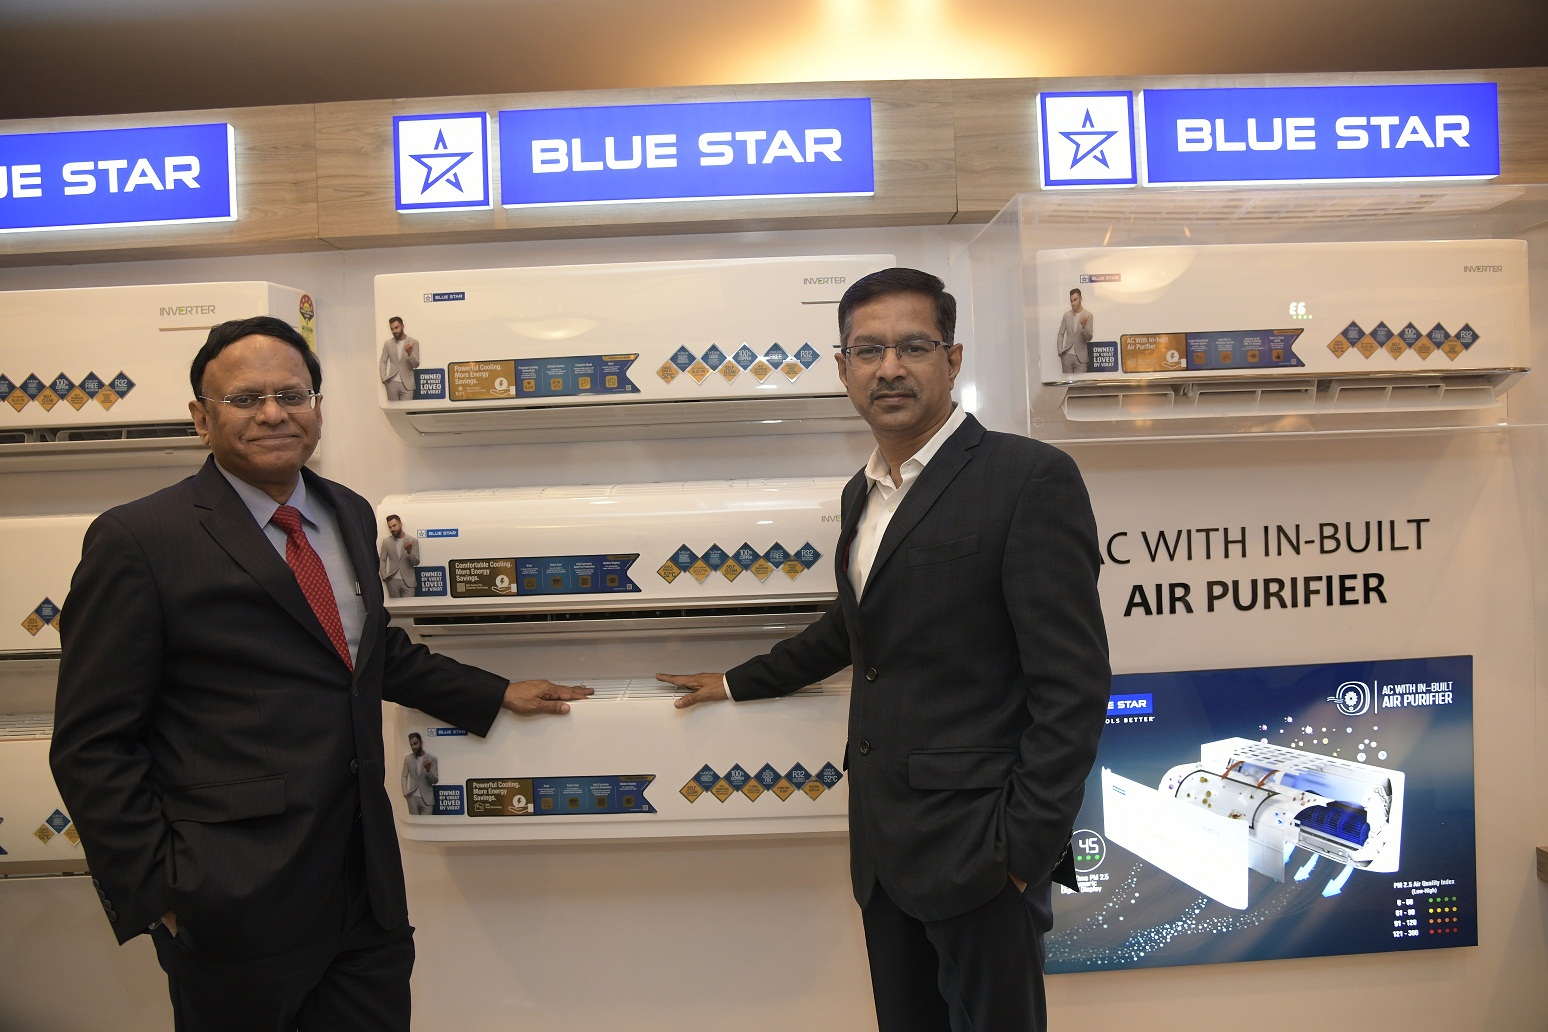 B. Thiagarajan, Managing Director, Blue Star Ltd. (left)  and C. Haridas, Vice President, Sales & Marketing, Room Air Conditioners Division,  Blue Star Ltd. in front of the display at the venue of the company’s press conference in Mumbai to announce the launch of Blue Star’s ‘premium-yet-affordable’ air conditioners.